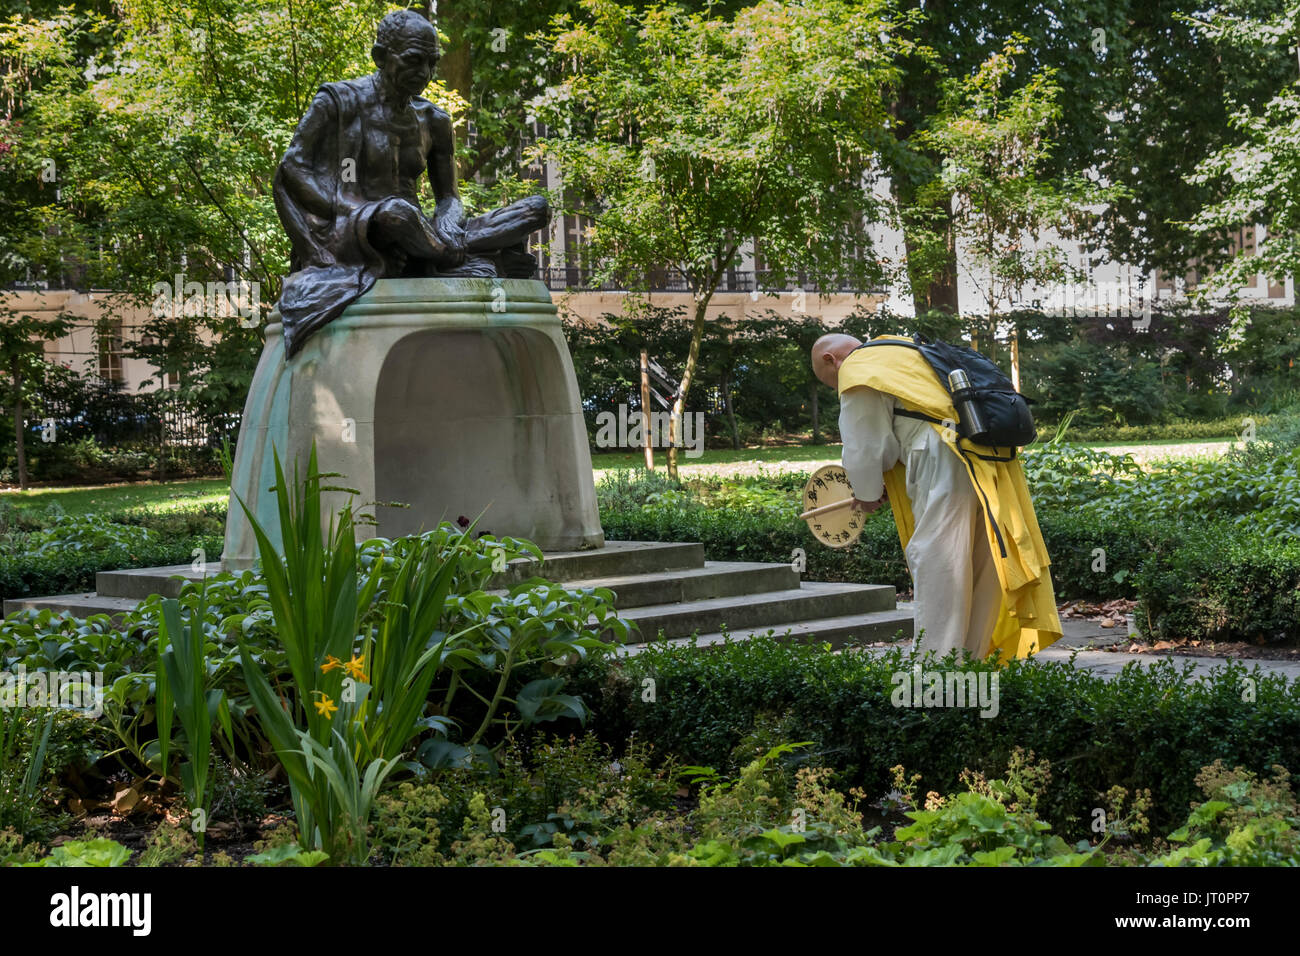 London, UK. 6th Aug, 2017. London, UK. 6th August 2017. Buddhist monk Rev Gyoro Nagase prays at the statue of Gandhi before the London CND ceremony in memory of the victims, past and present on the 72nd anniversary of the dropping of the atomic bomb on Hiroshima and the second atomic bomb dropped on Nagasaki three days later. After a number of speeches and performances there was a minute's silence during which the Deputy Mayor of Camden and others laid flowers around the commemorative cherry tree. Peter Marshall ImagesLive Credit: Peter Marshall/ImagesLive/ZUMA Wire/Alamy Live News Stock Photo